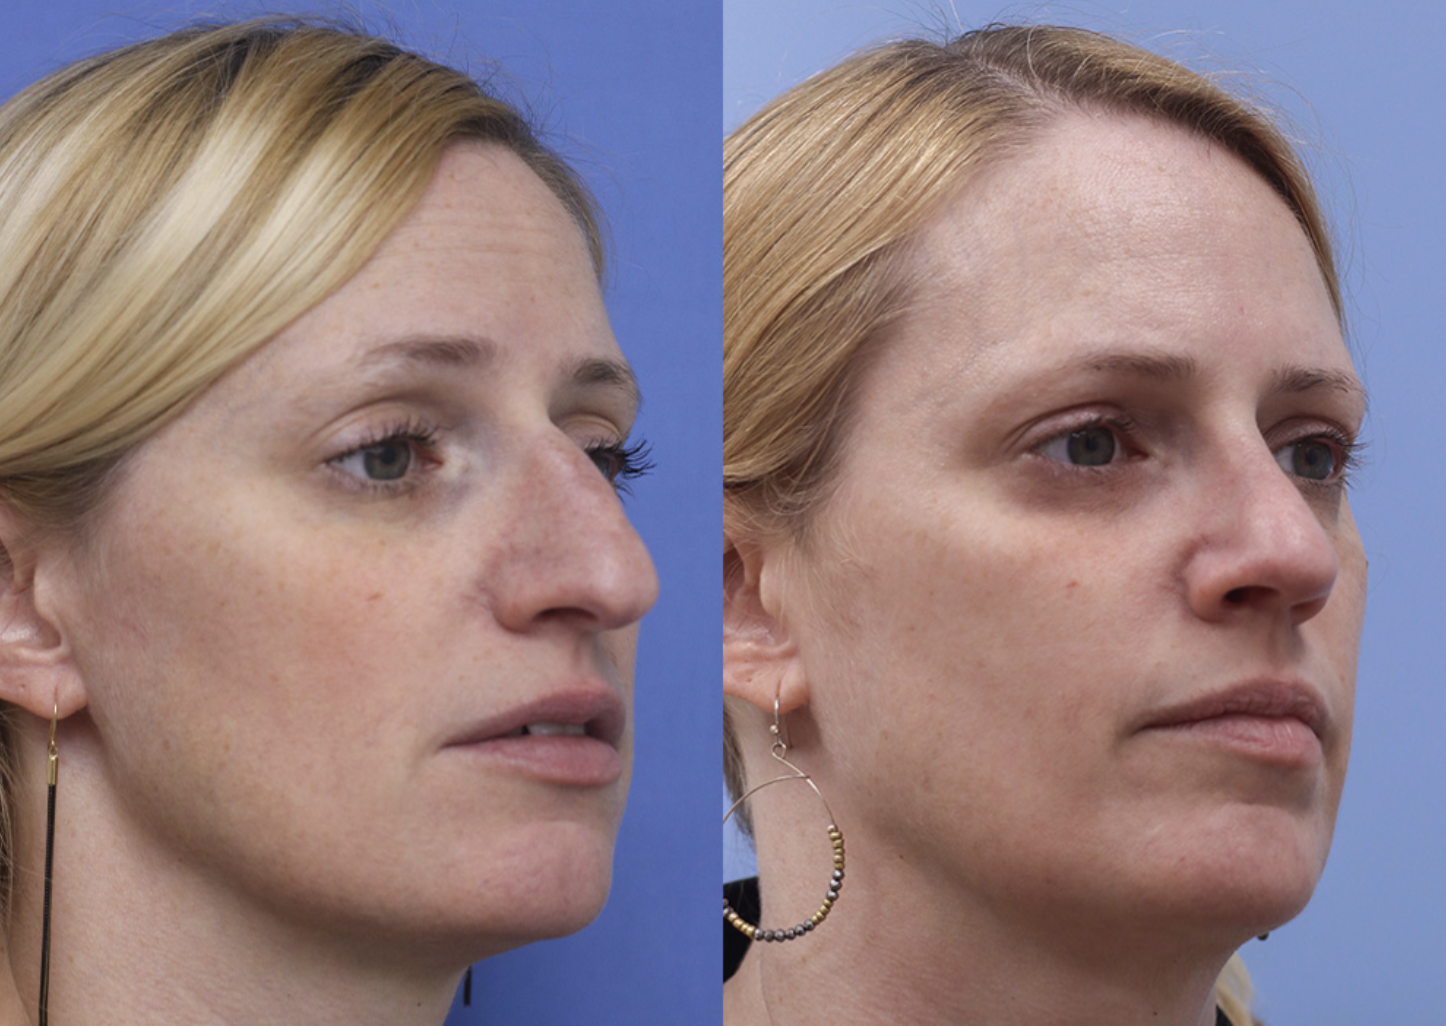 Before and After Rhinoplasty in Boston